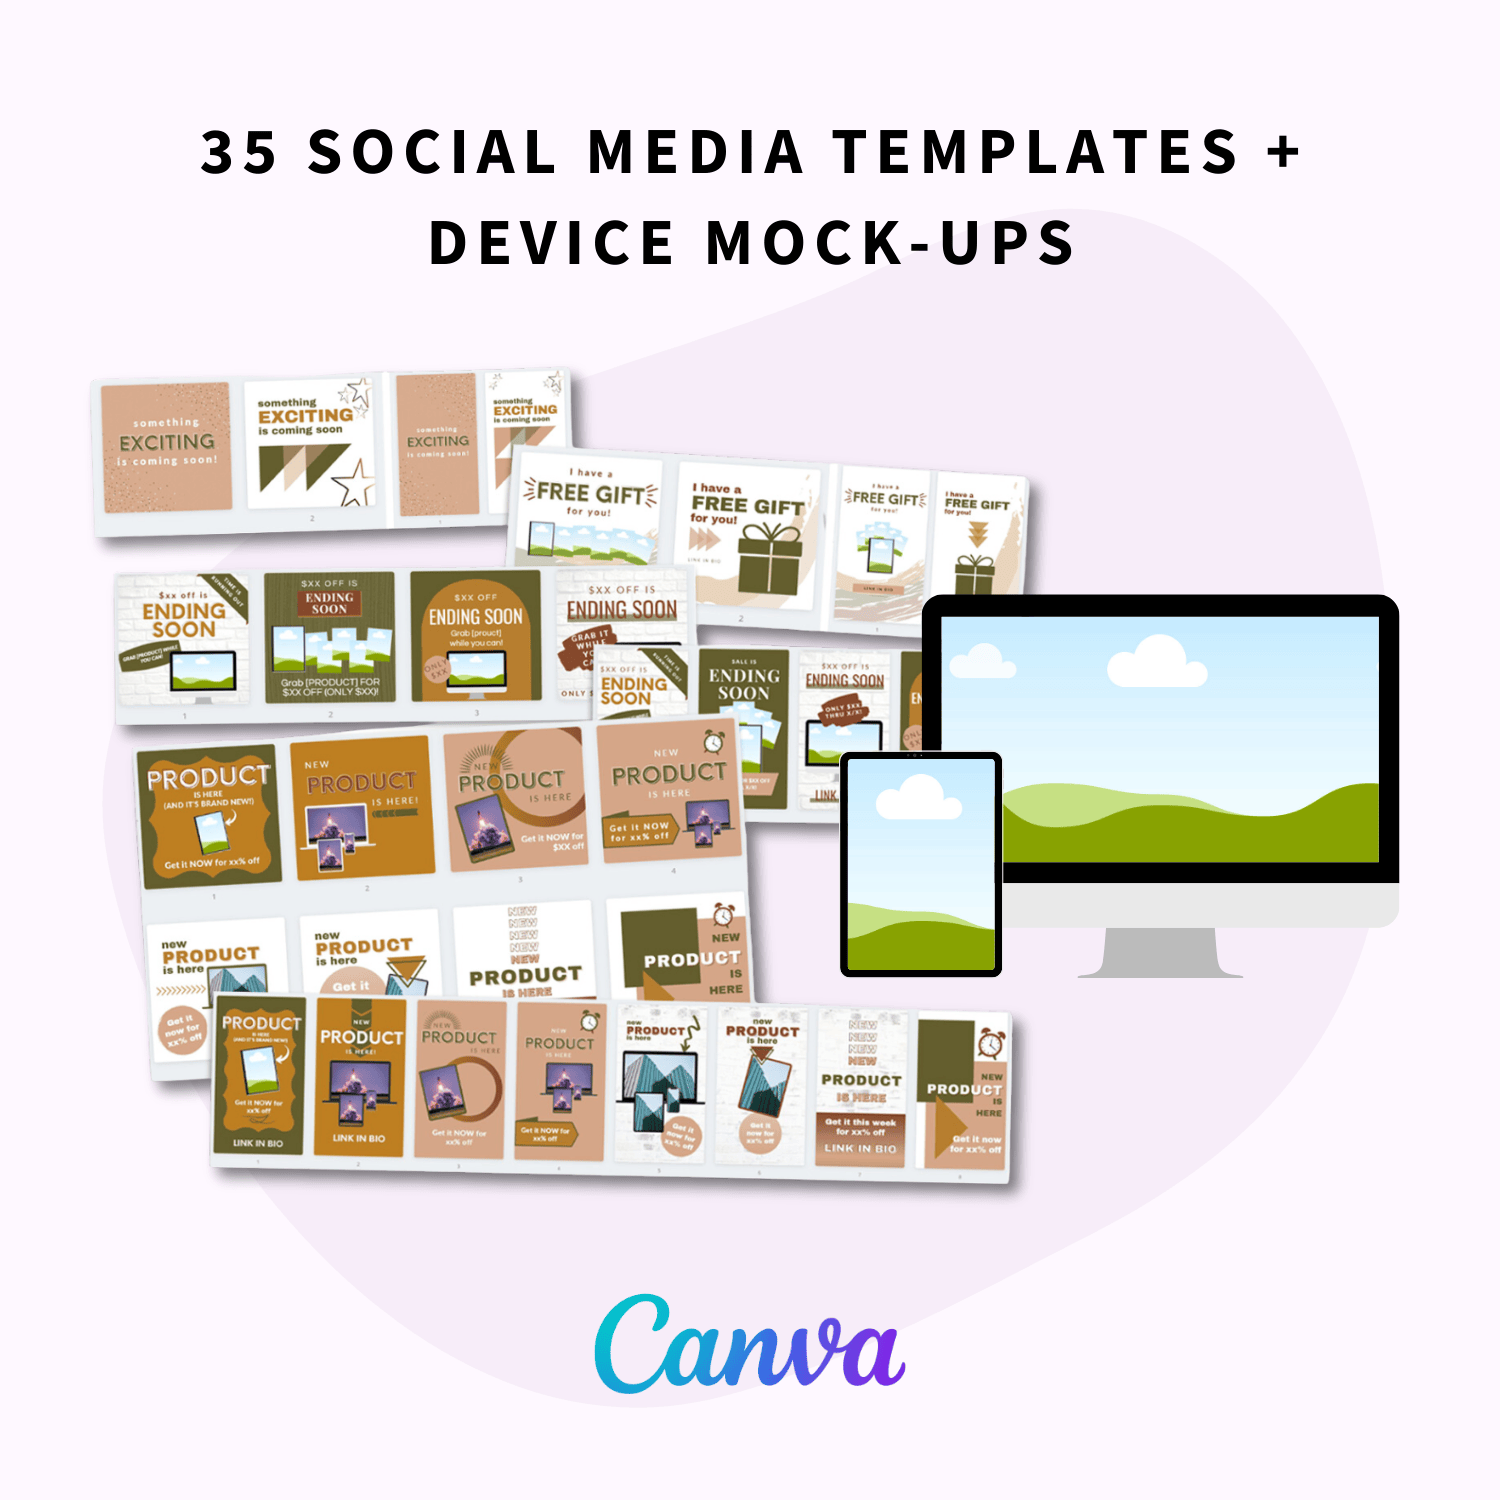 social media templates and device mockups in canva in the Digital Product Extravaganza Toolbox